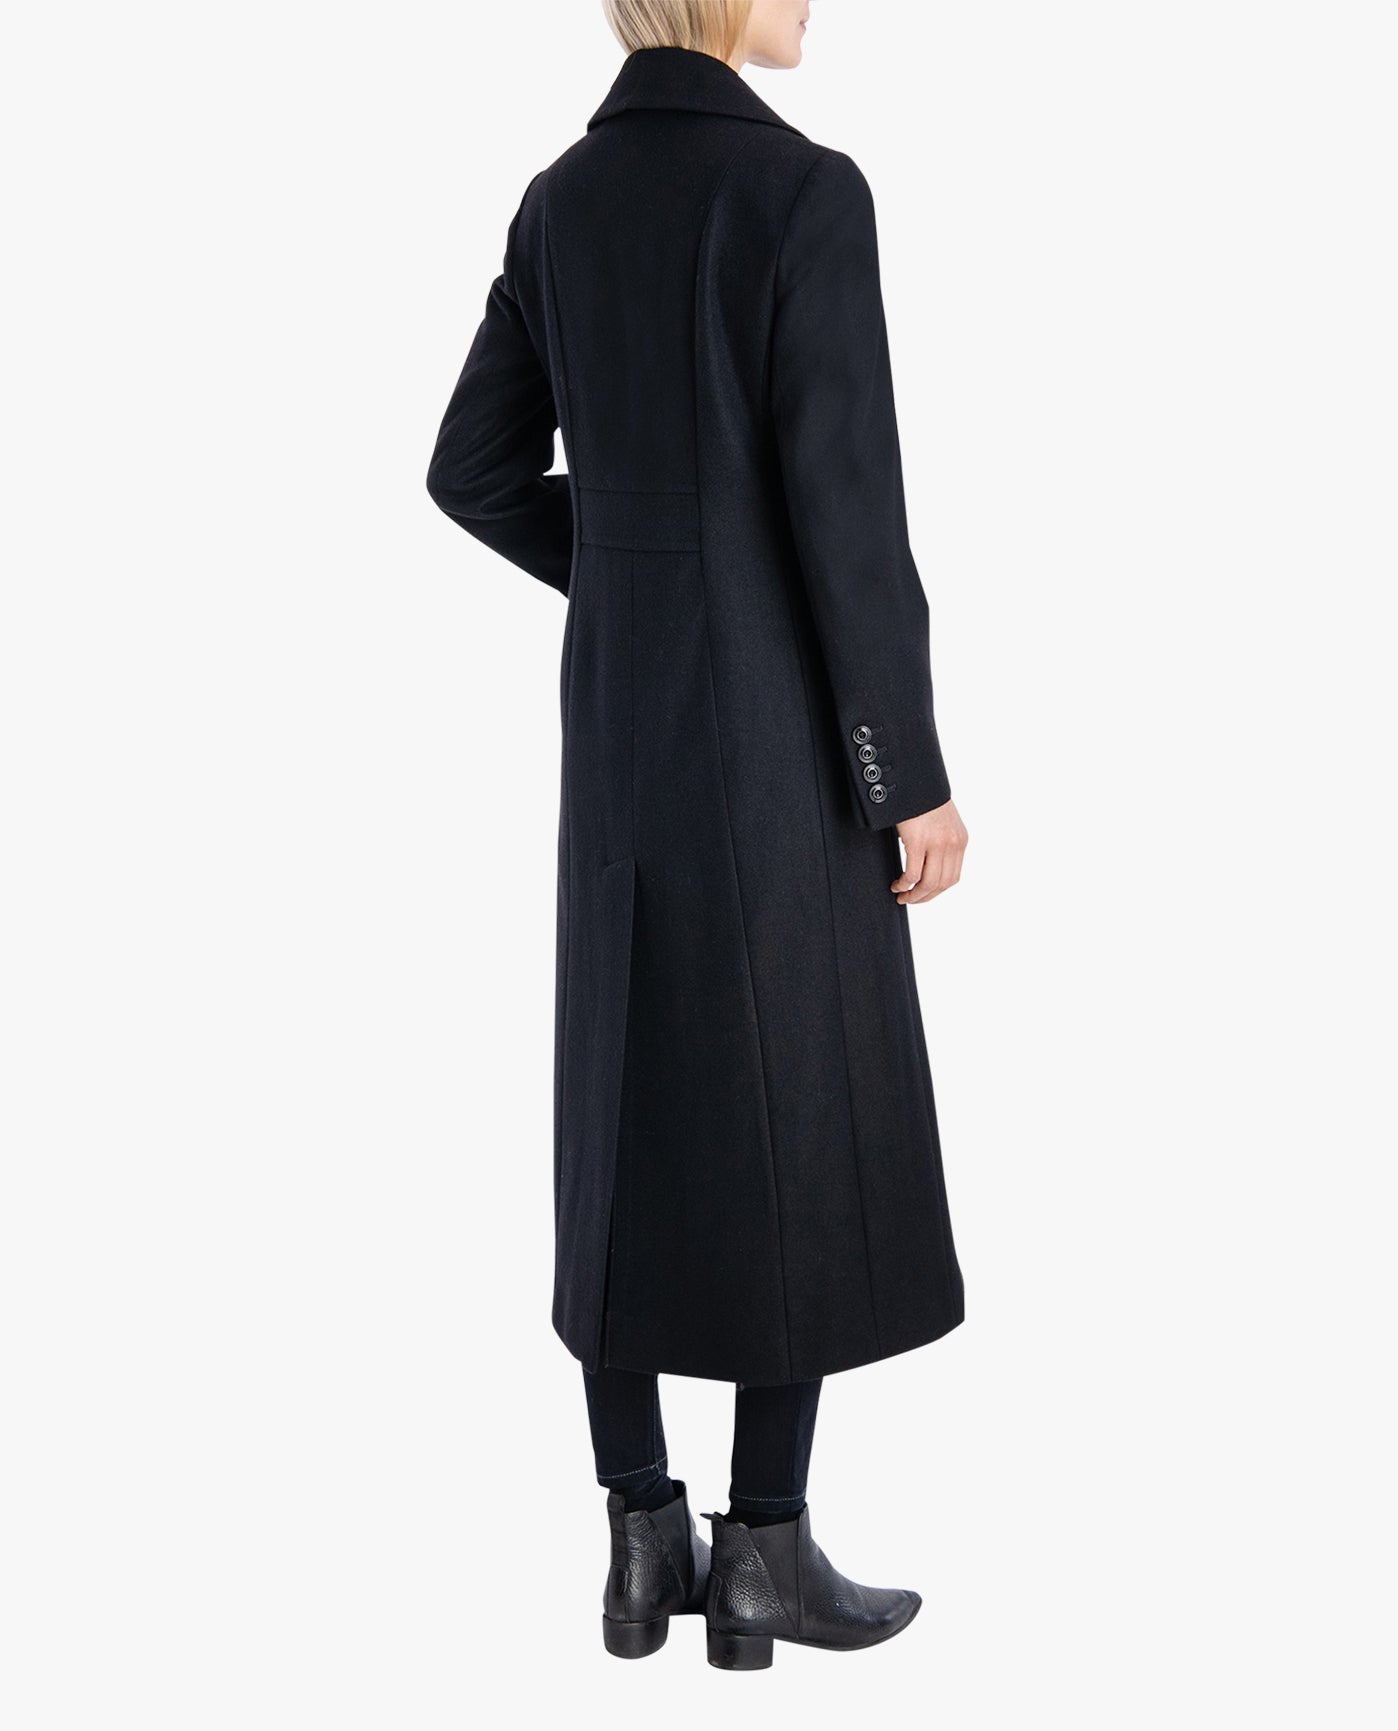 Back View Of SINGLE BREASTED MAXI PEACOAT | BLACK